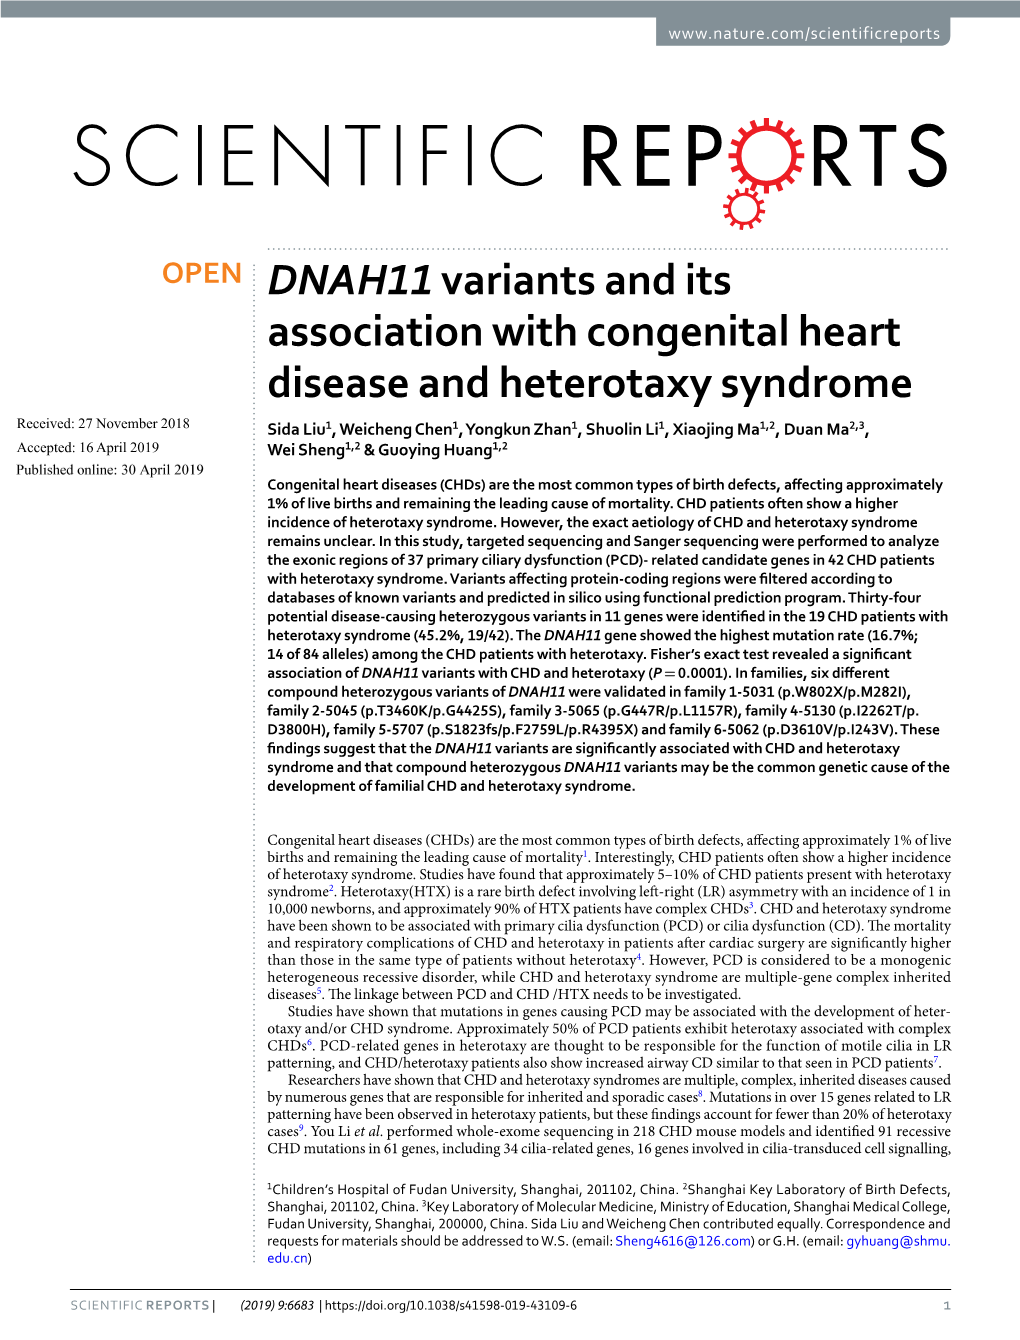 DNAH11 Variants and Its Association with Congenital Heart Disease And